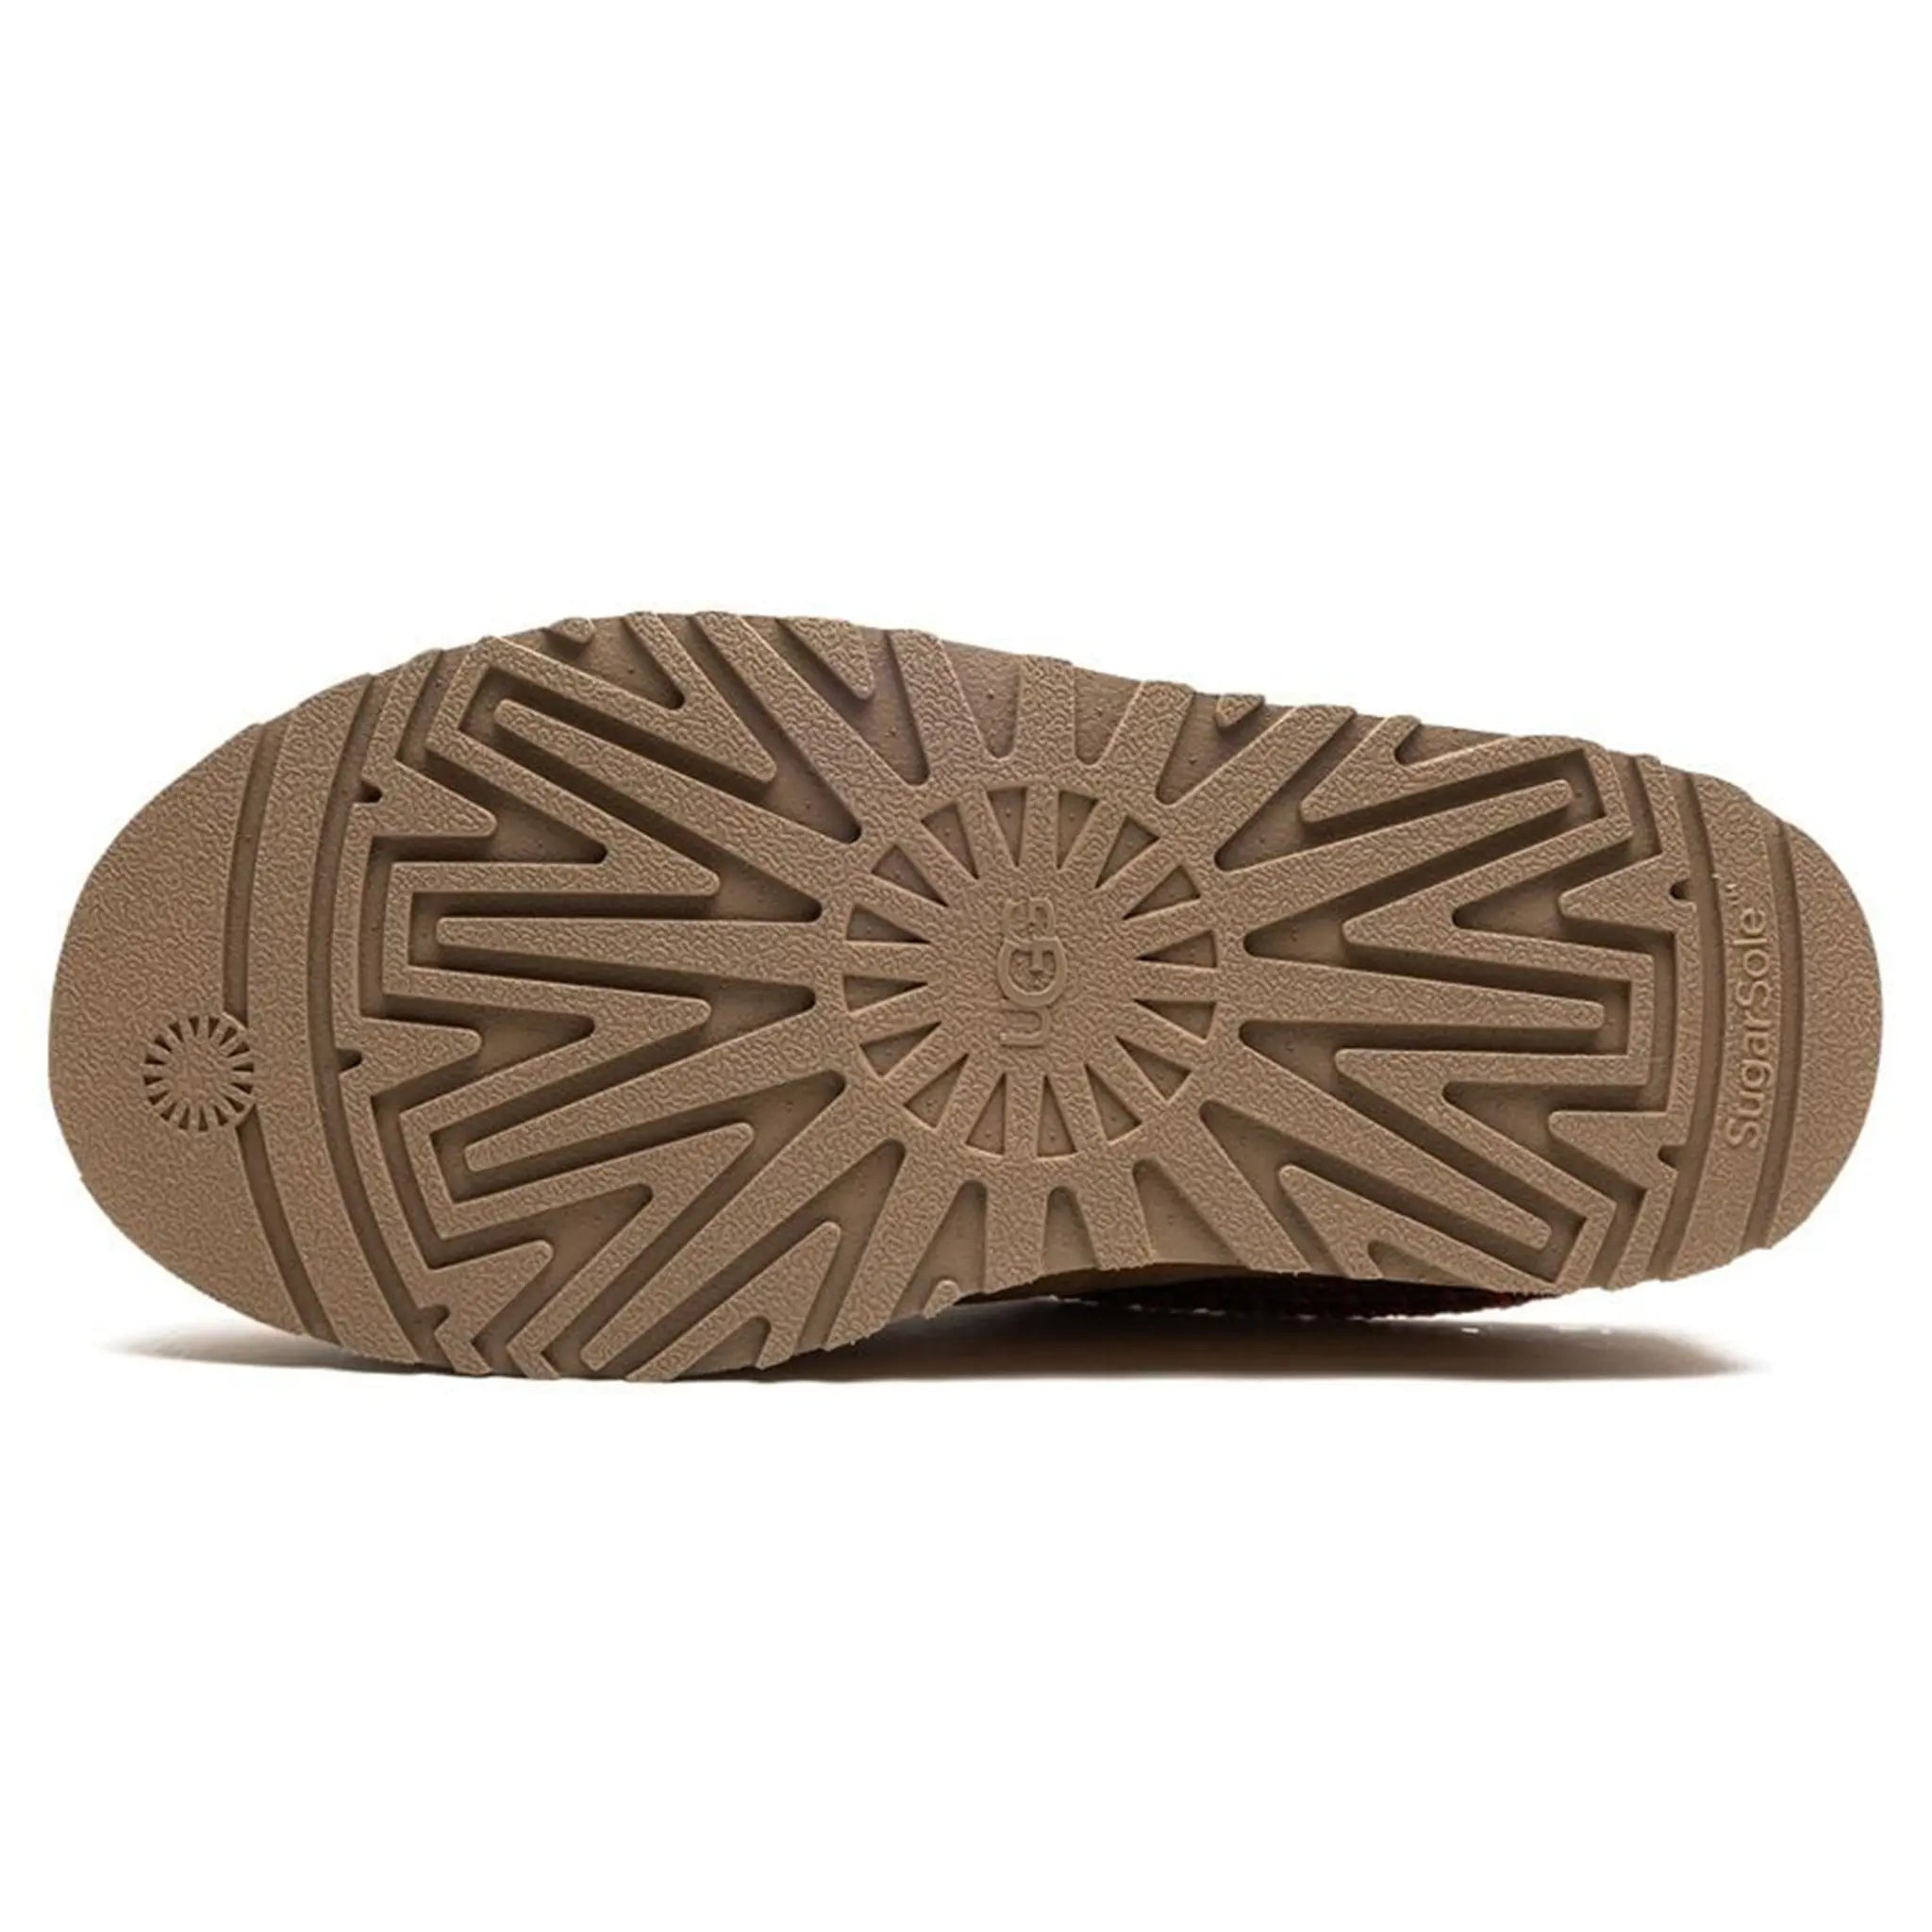 Sole view of UGG Tazz Chestnut Kids Slippers 1143776K-CHE